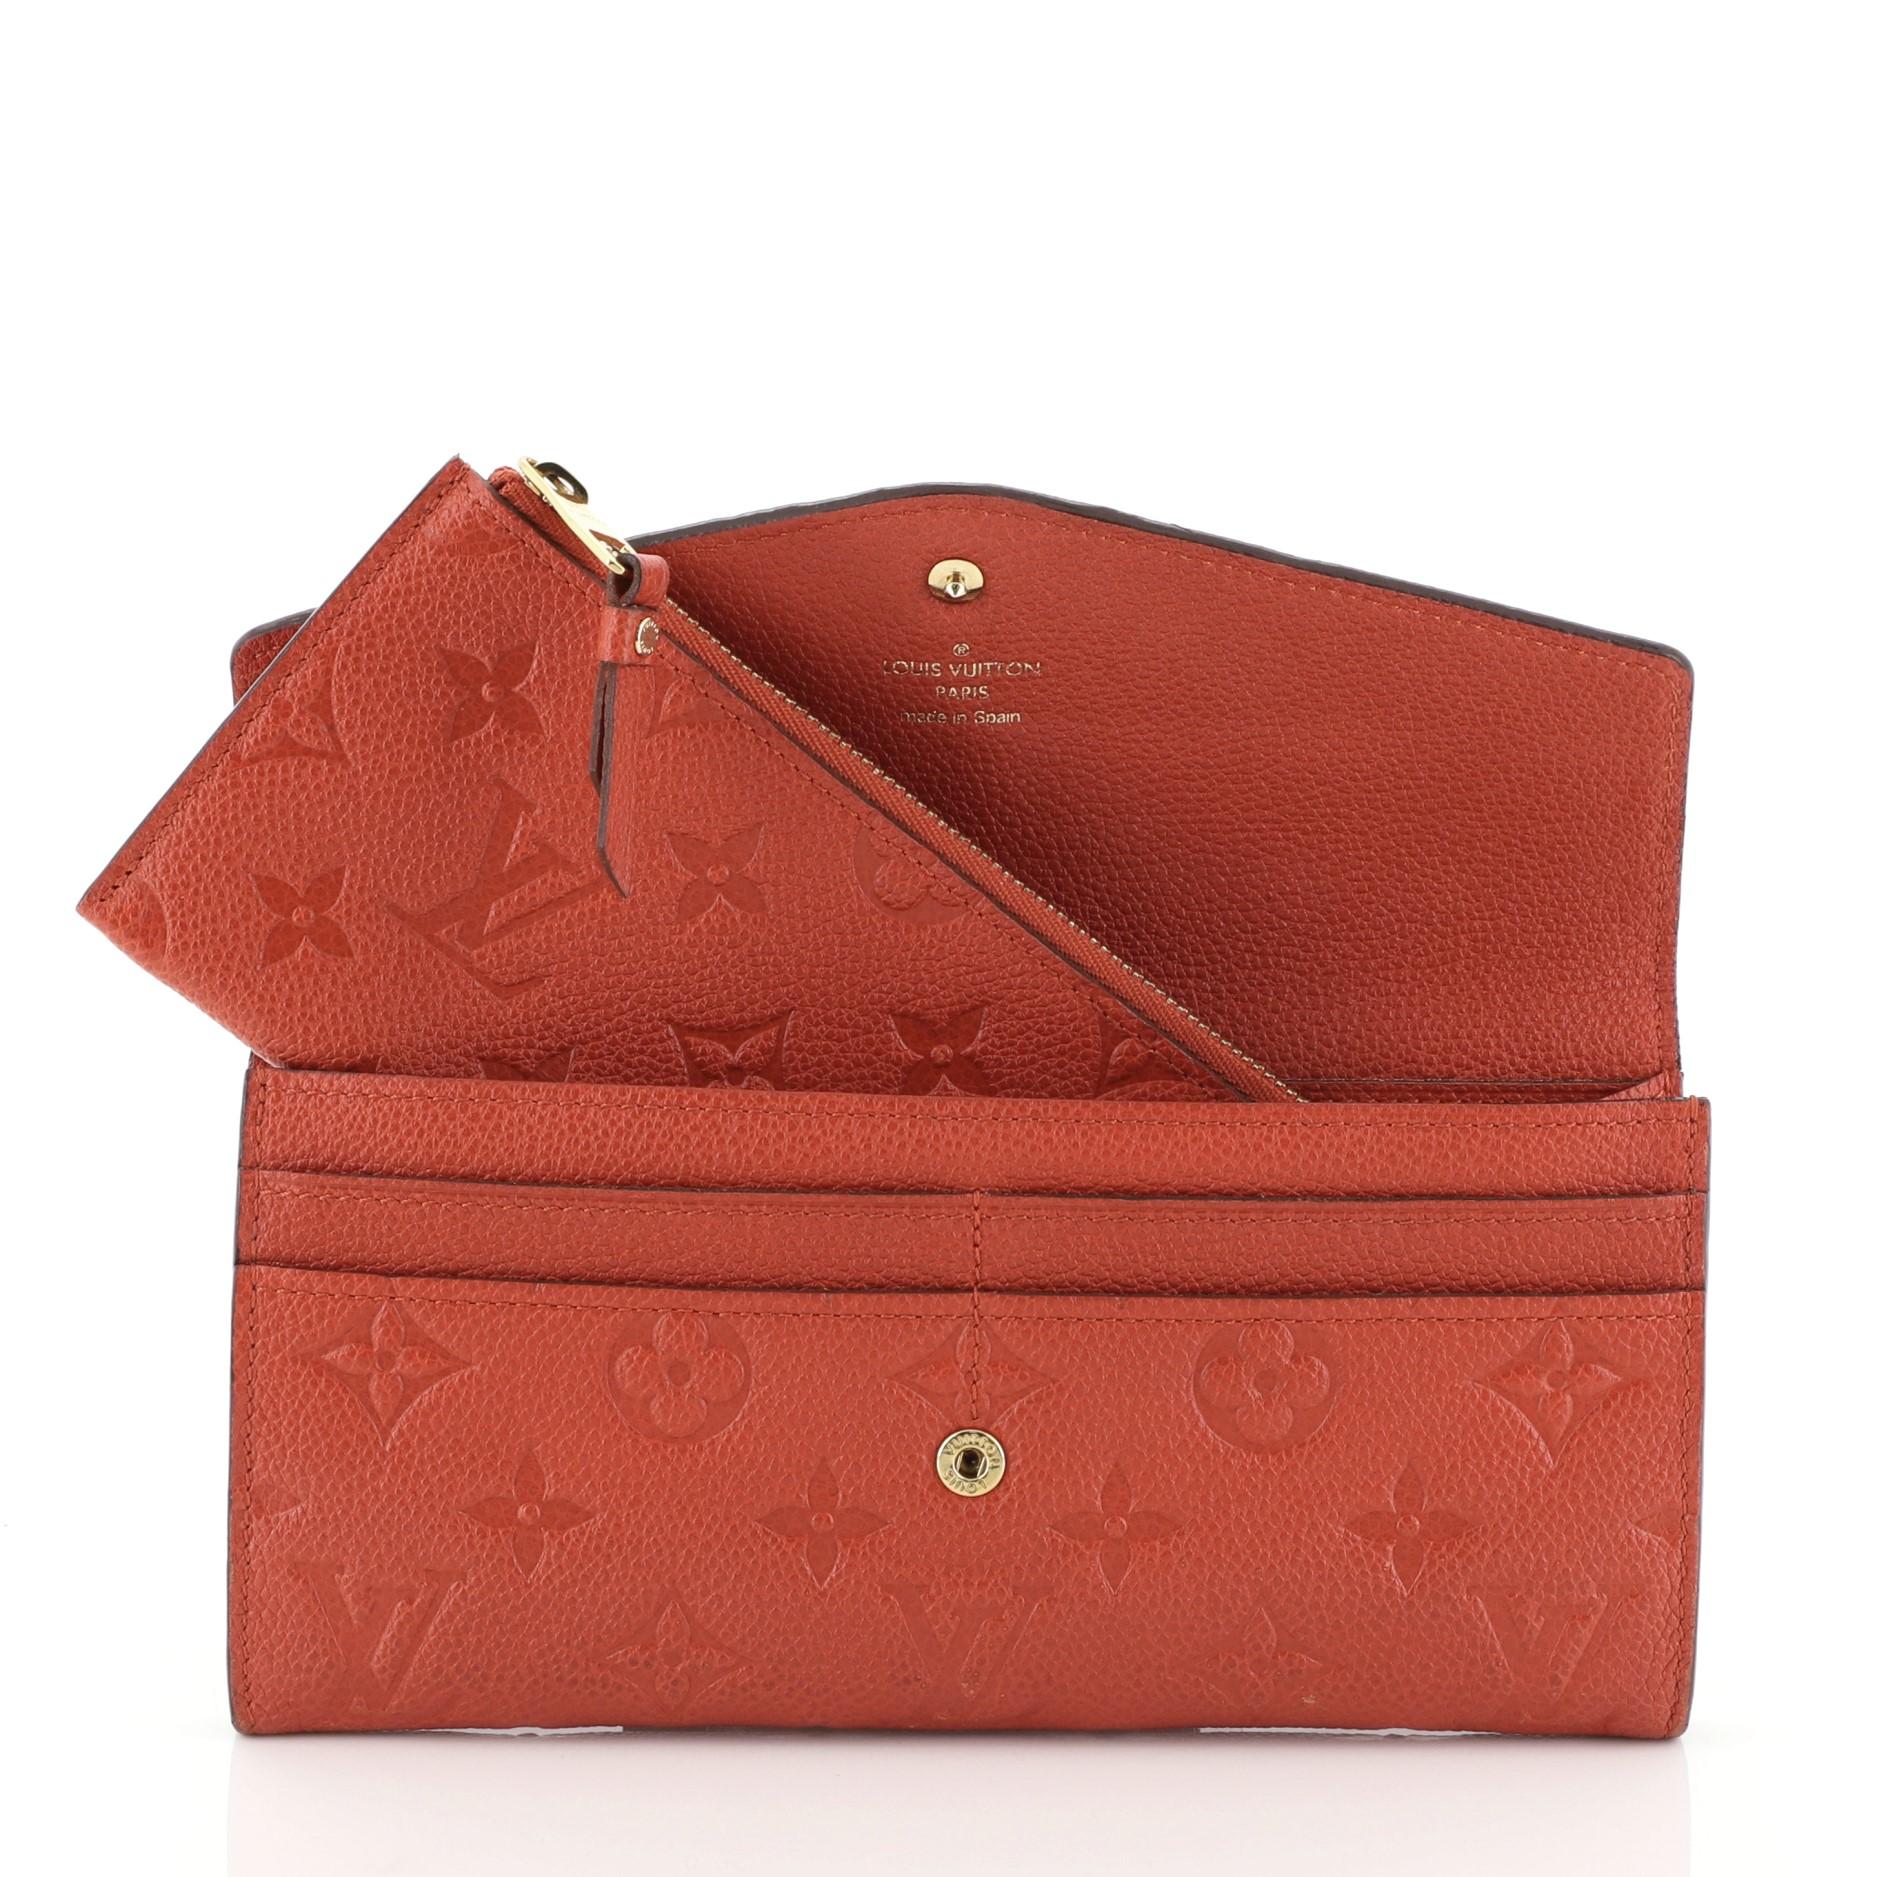 This Louis Vuitton Sarah Wallet NM Monogram Empreinte Leather crafted from red monogram empreinte leather, features an envelope-style frontal flap and gold-tone hardware. Its snap button closure opens to a red leather interior with multiple card